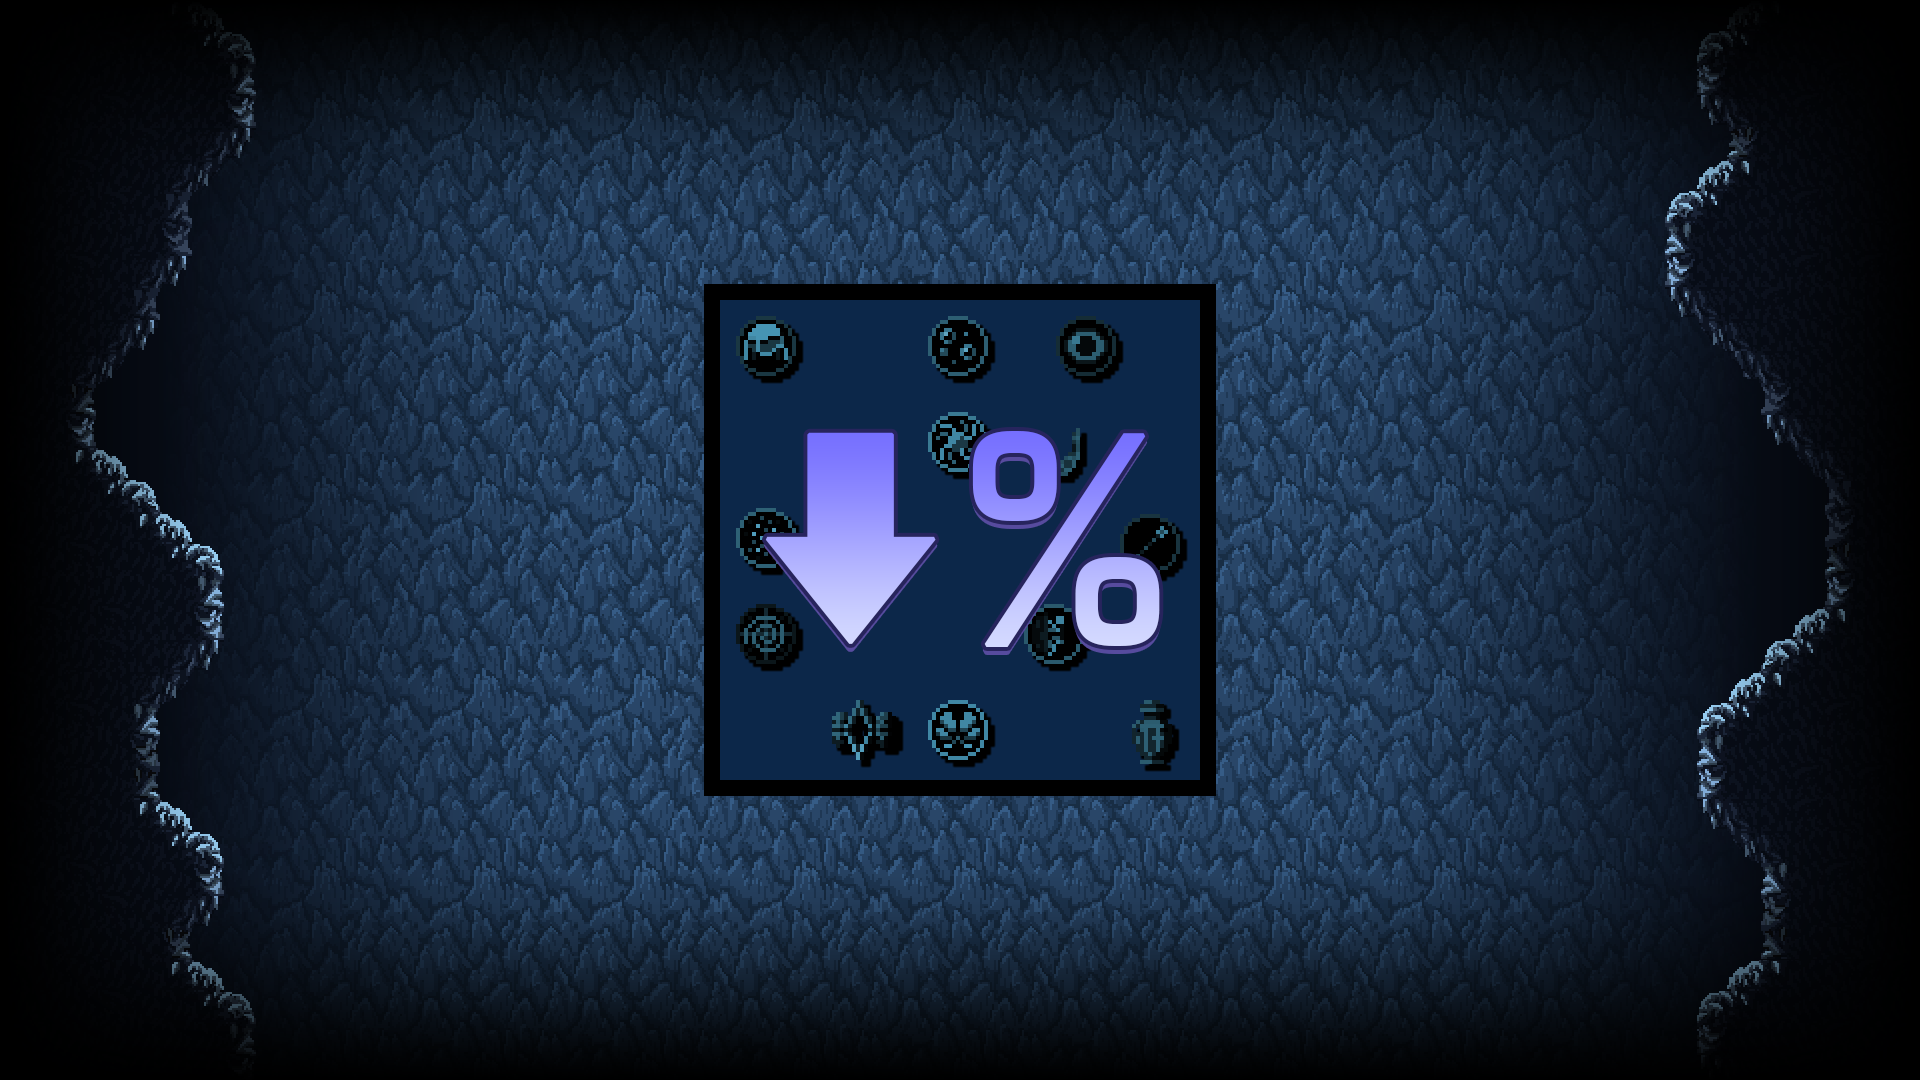 Icon for 100% Map